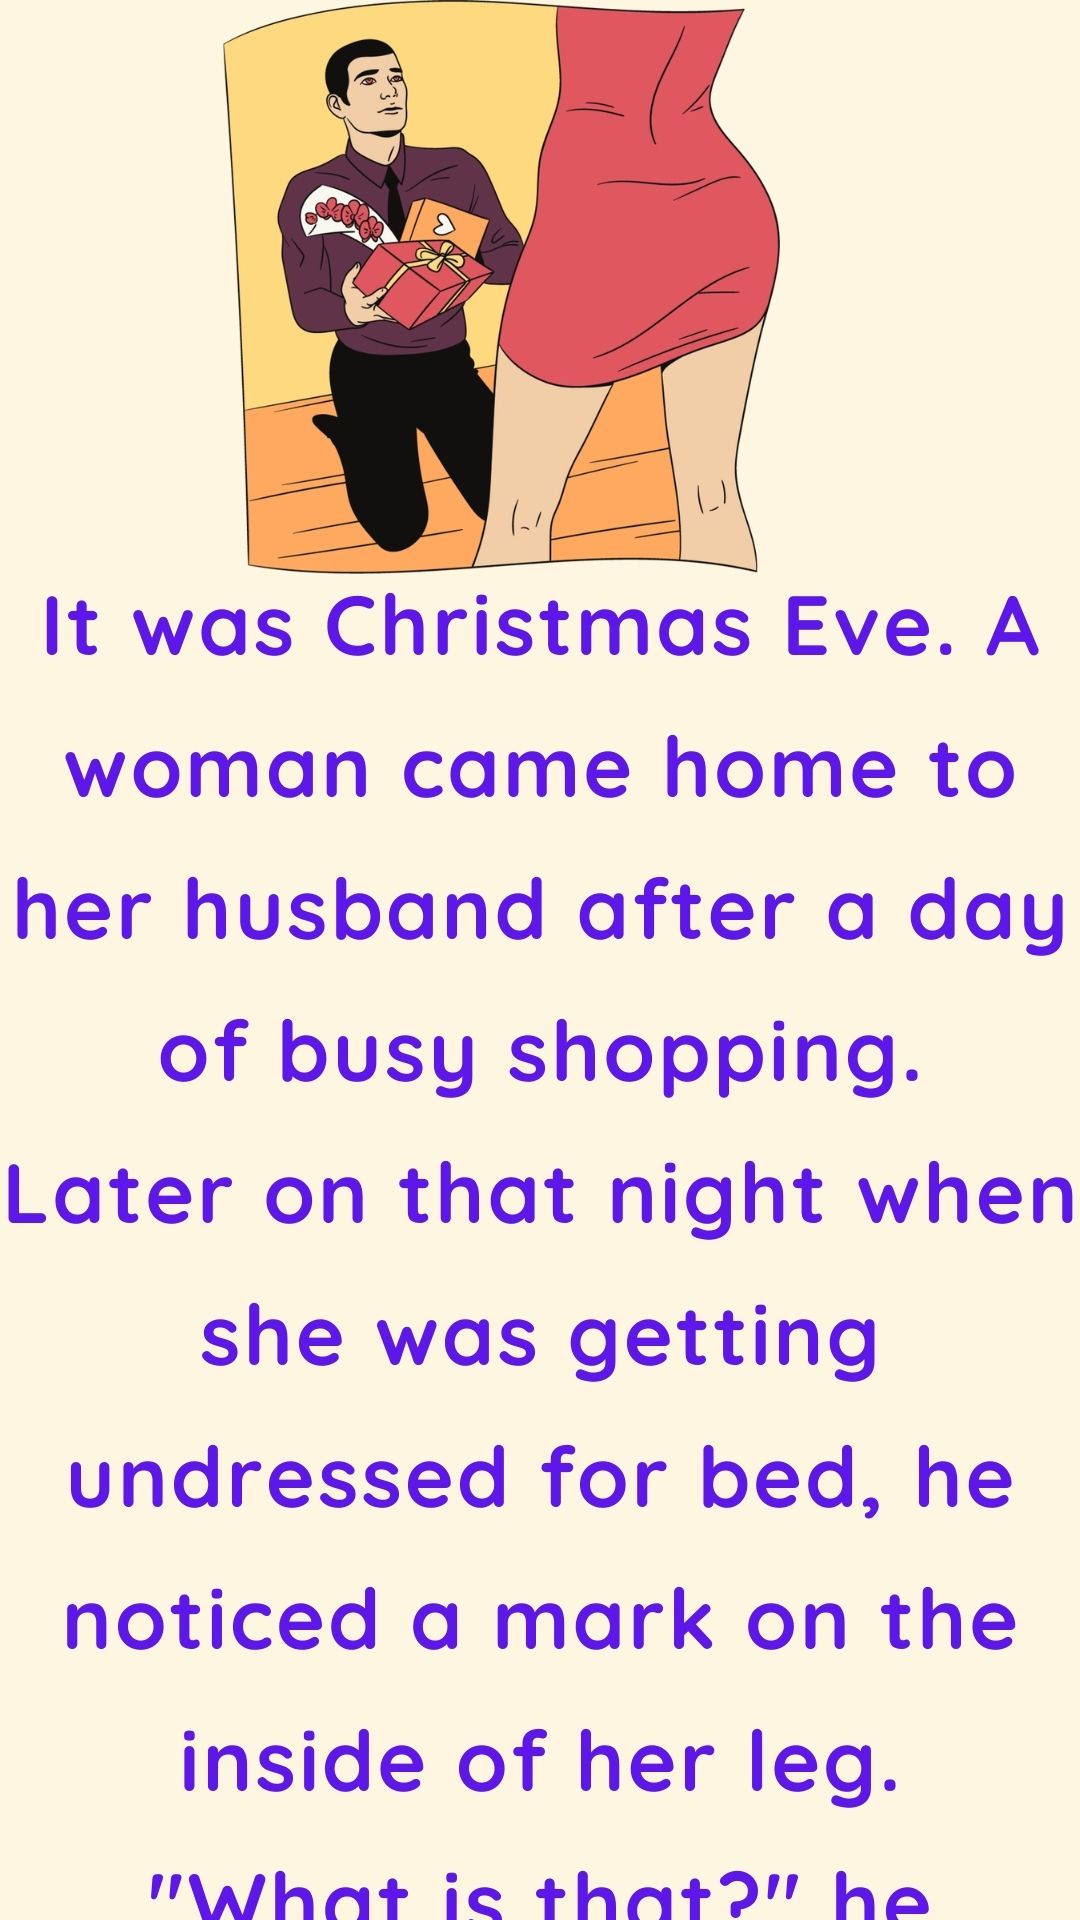 A woman came home to her husband